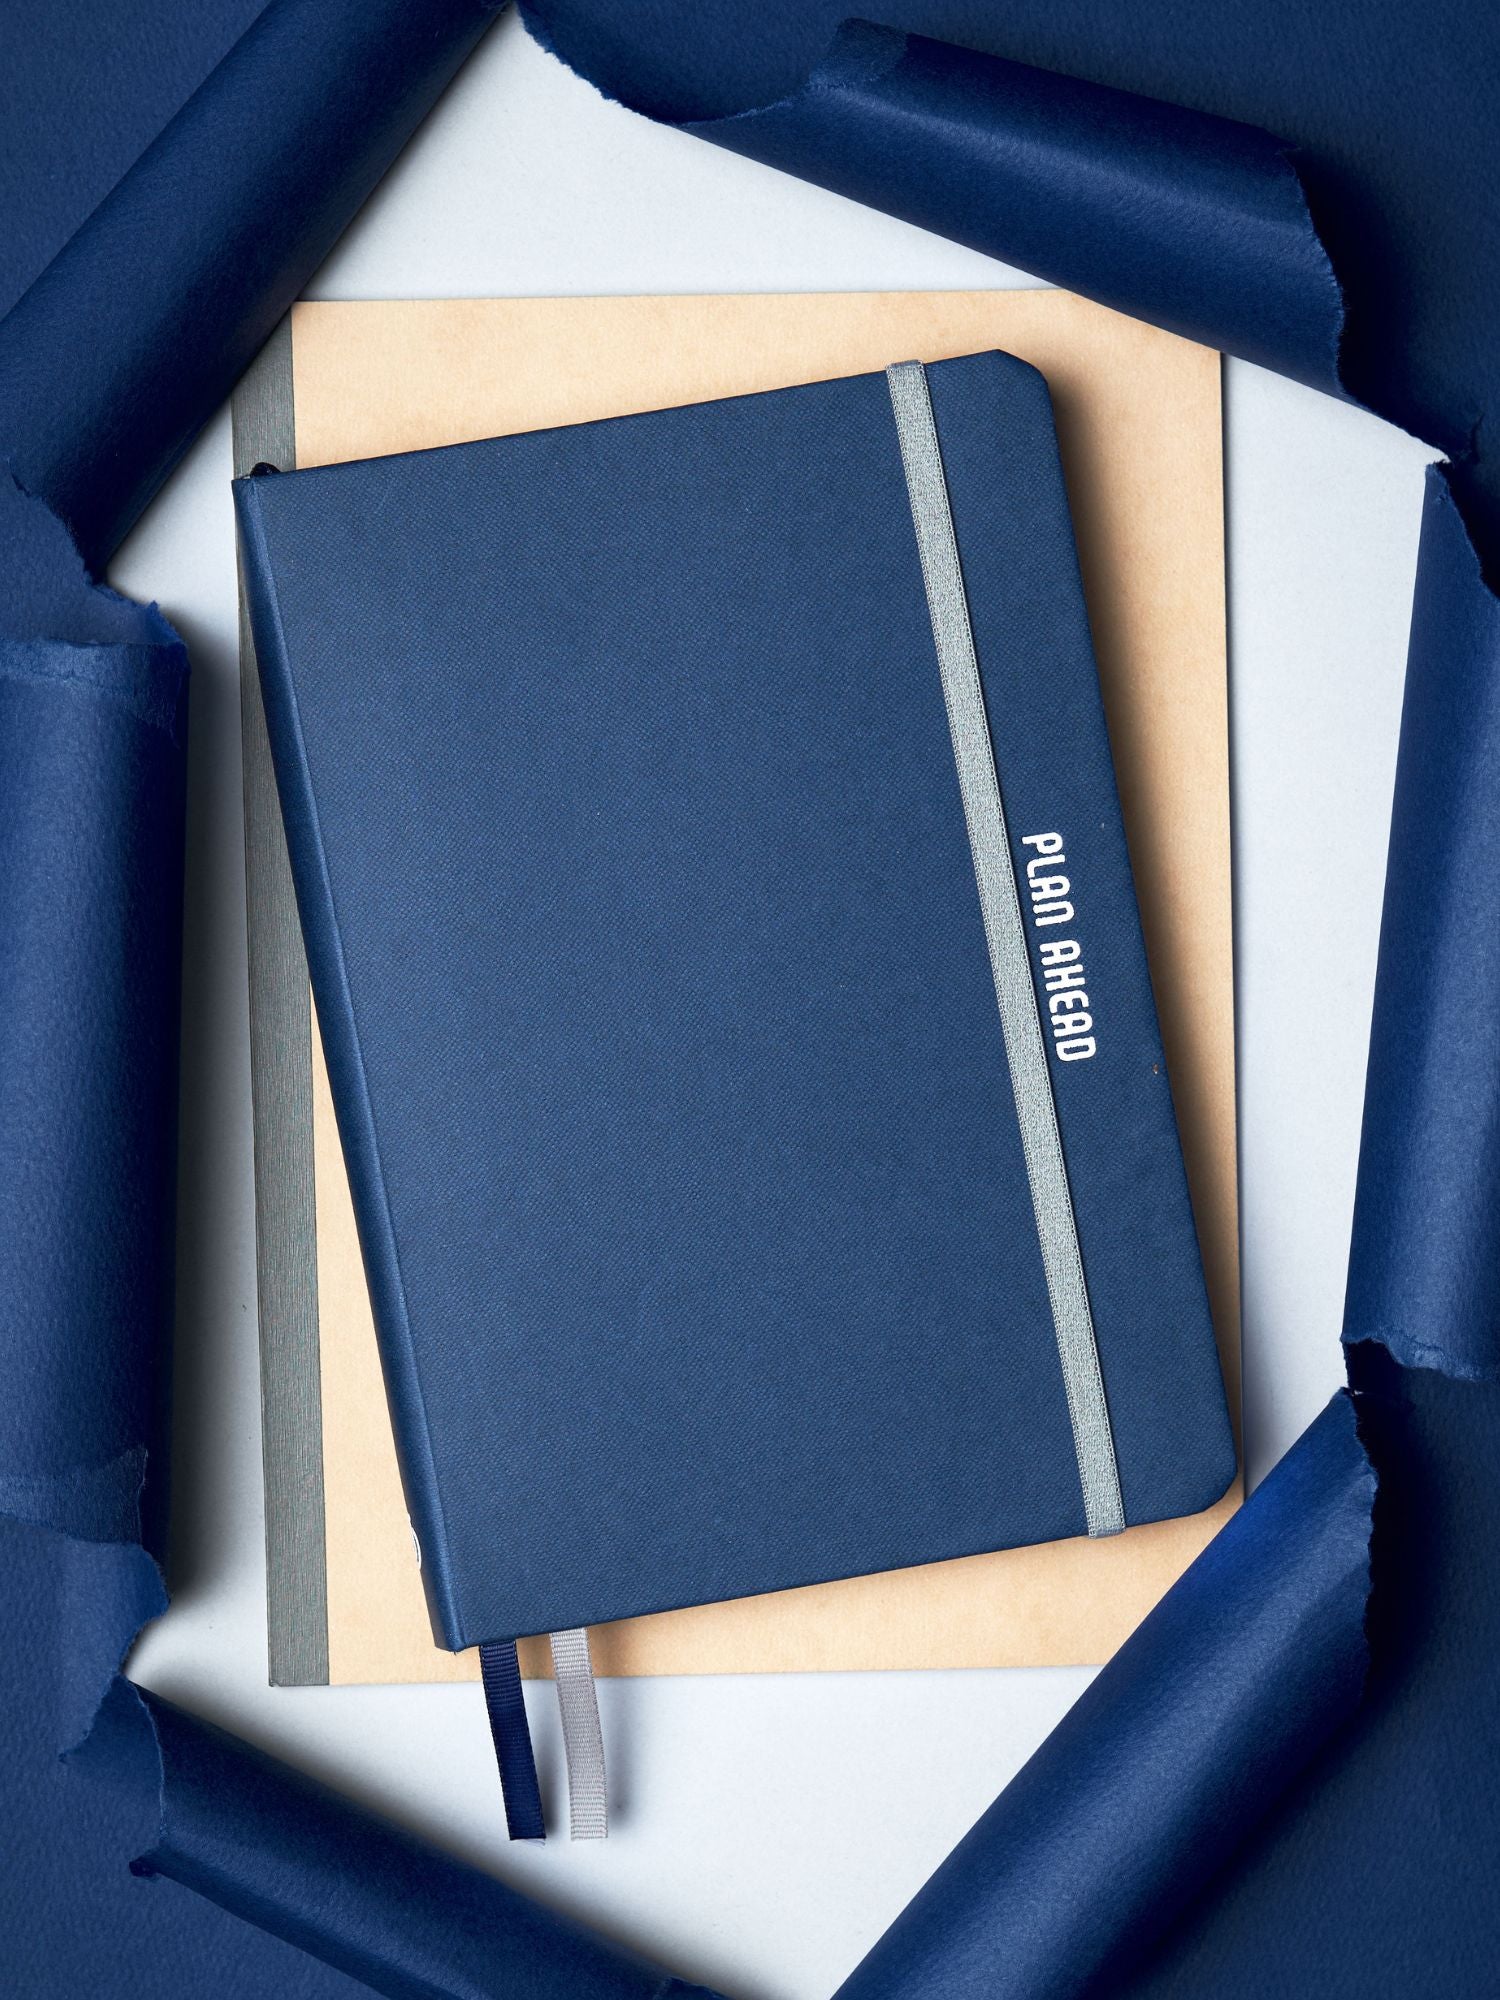 DOODLE Organise- It Hardbound A5 Weekly Planner - Blue